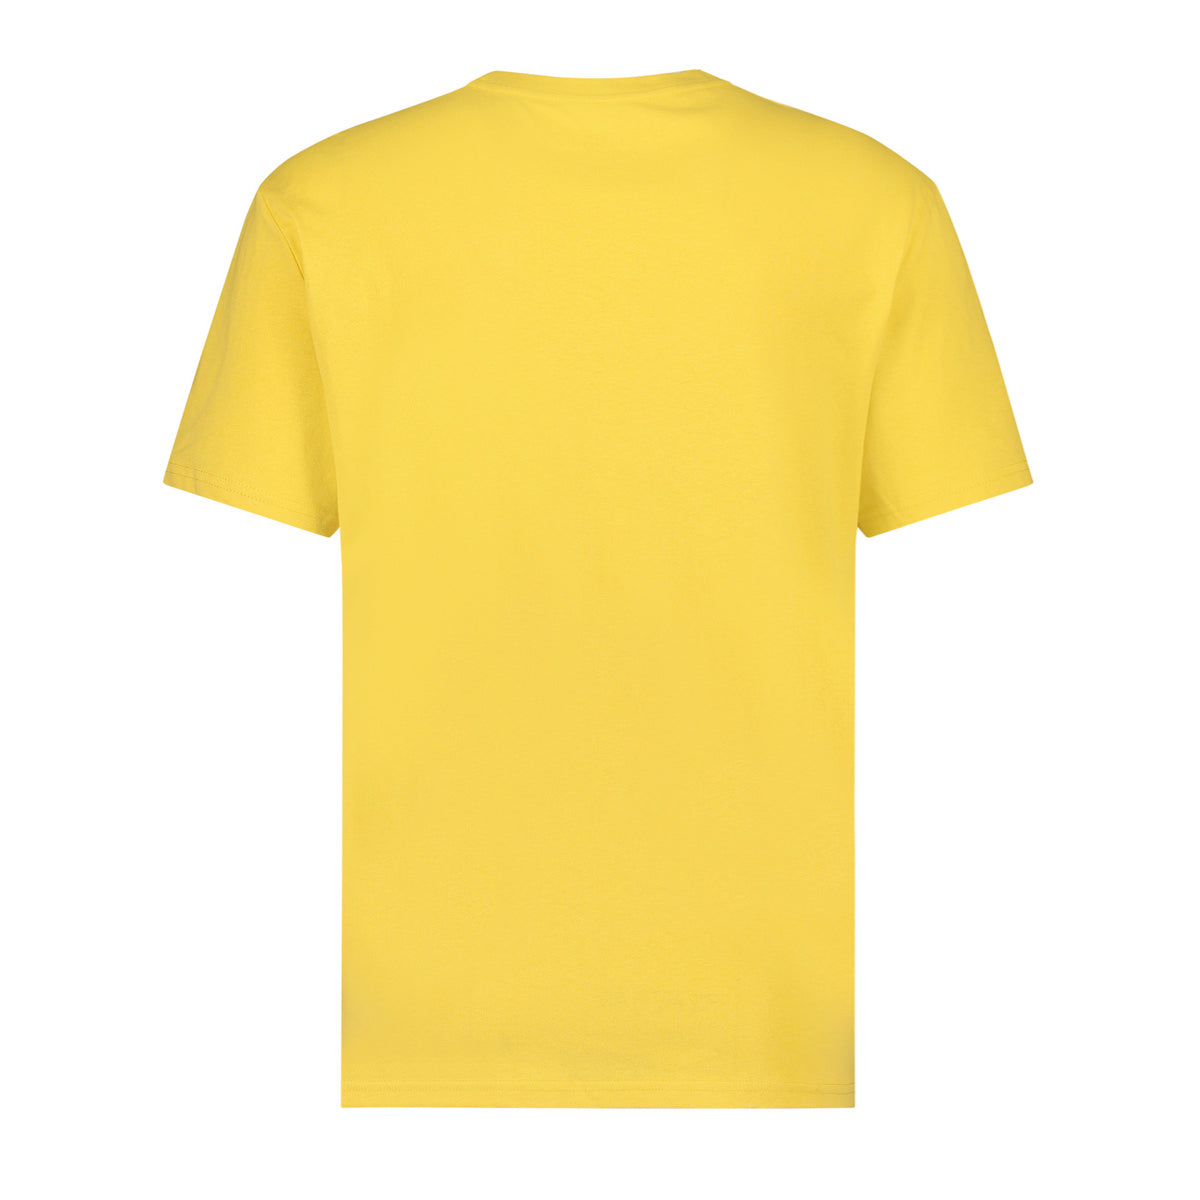 The Analogues | Sundays on the phone T-shirt Yellow | Back